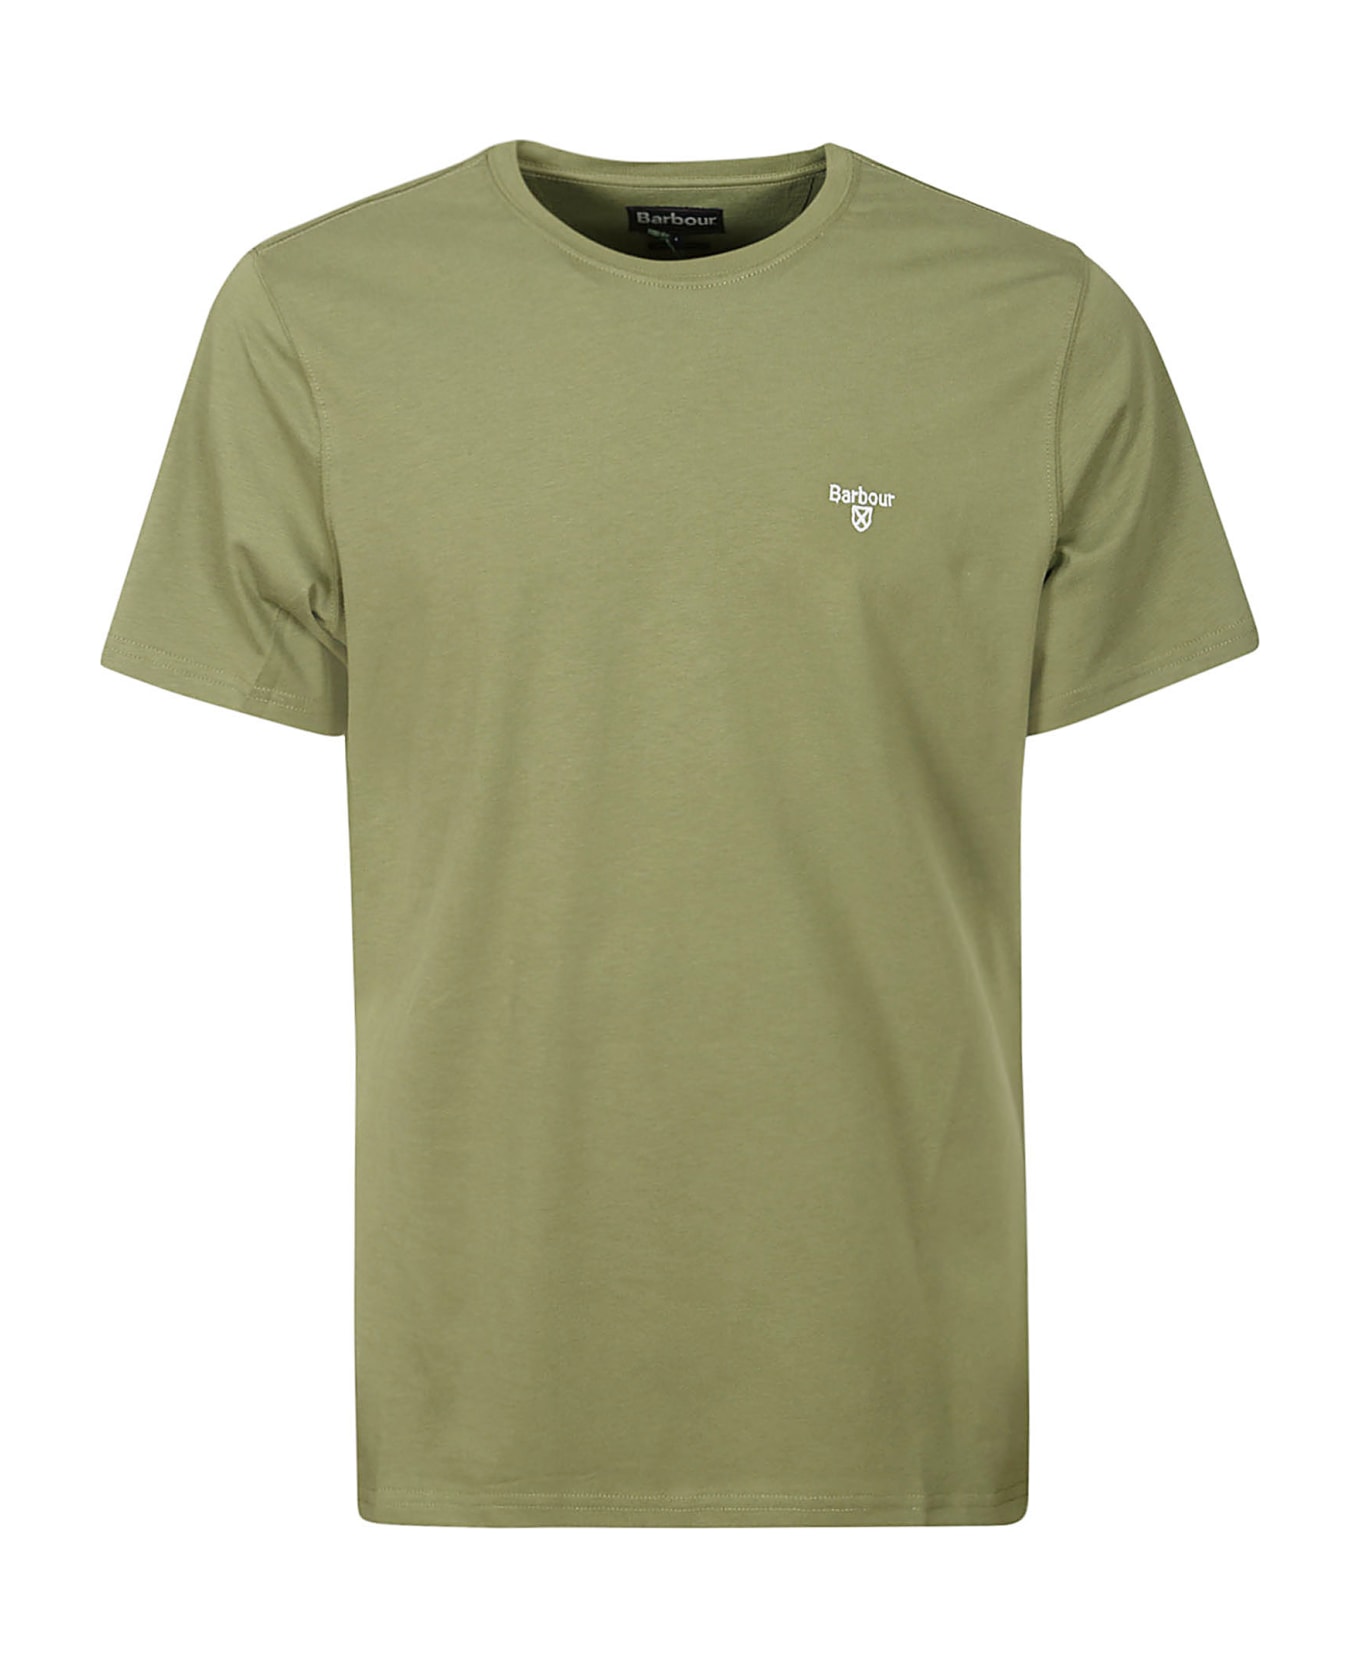 Barbour Essential Sports Tee - Burnt Olive シャツ